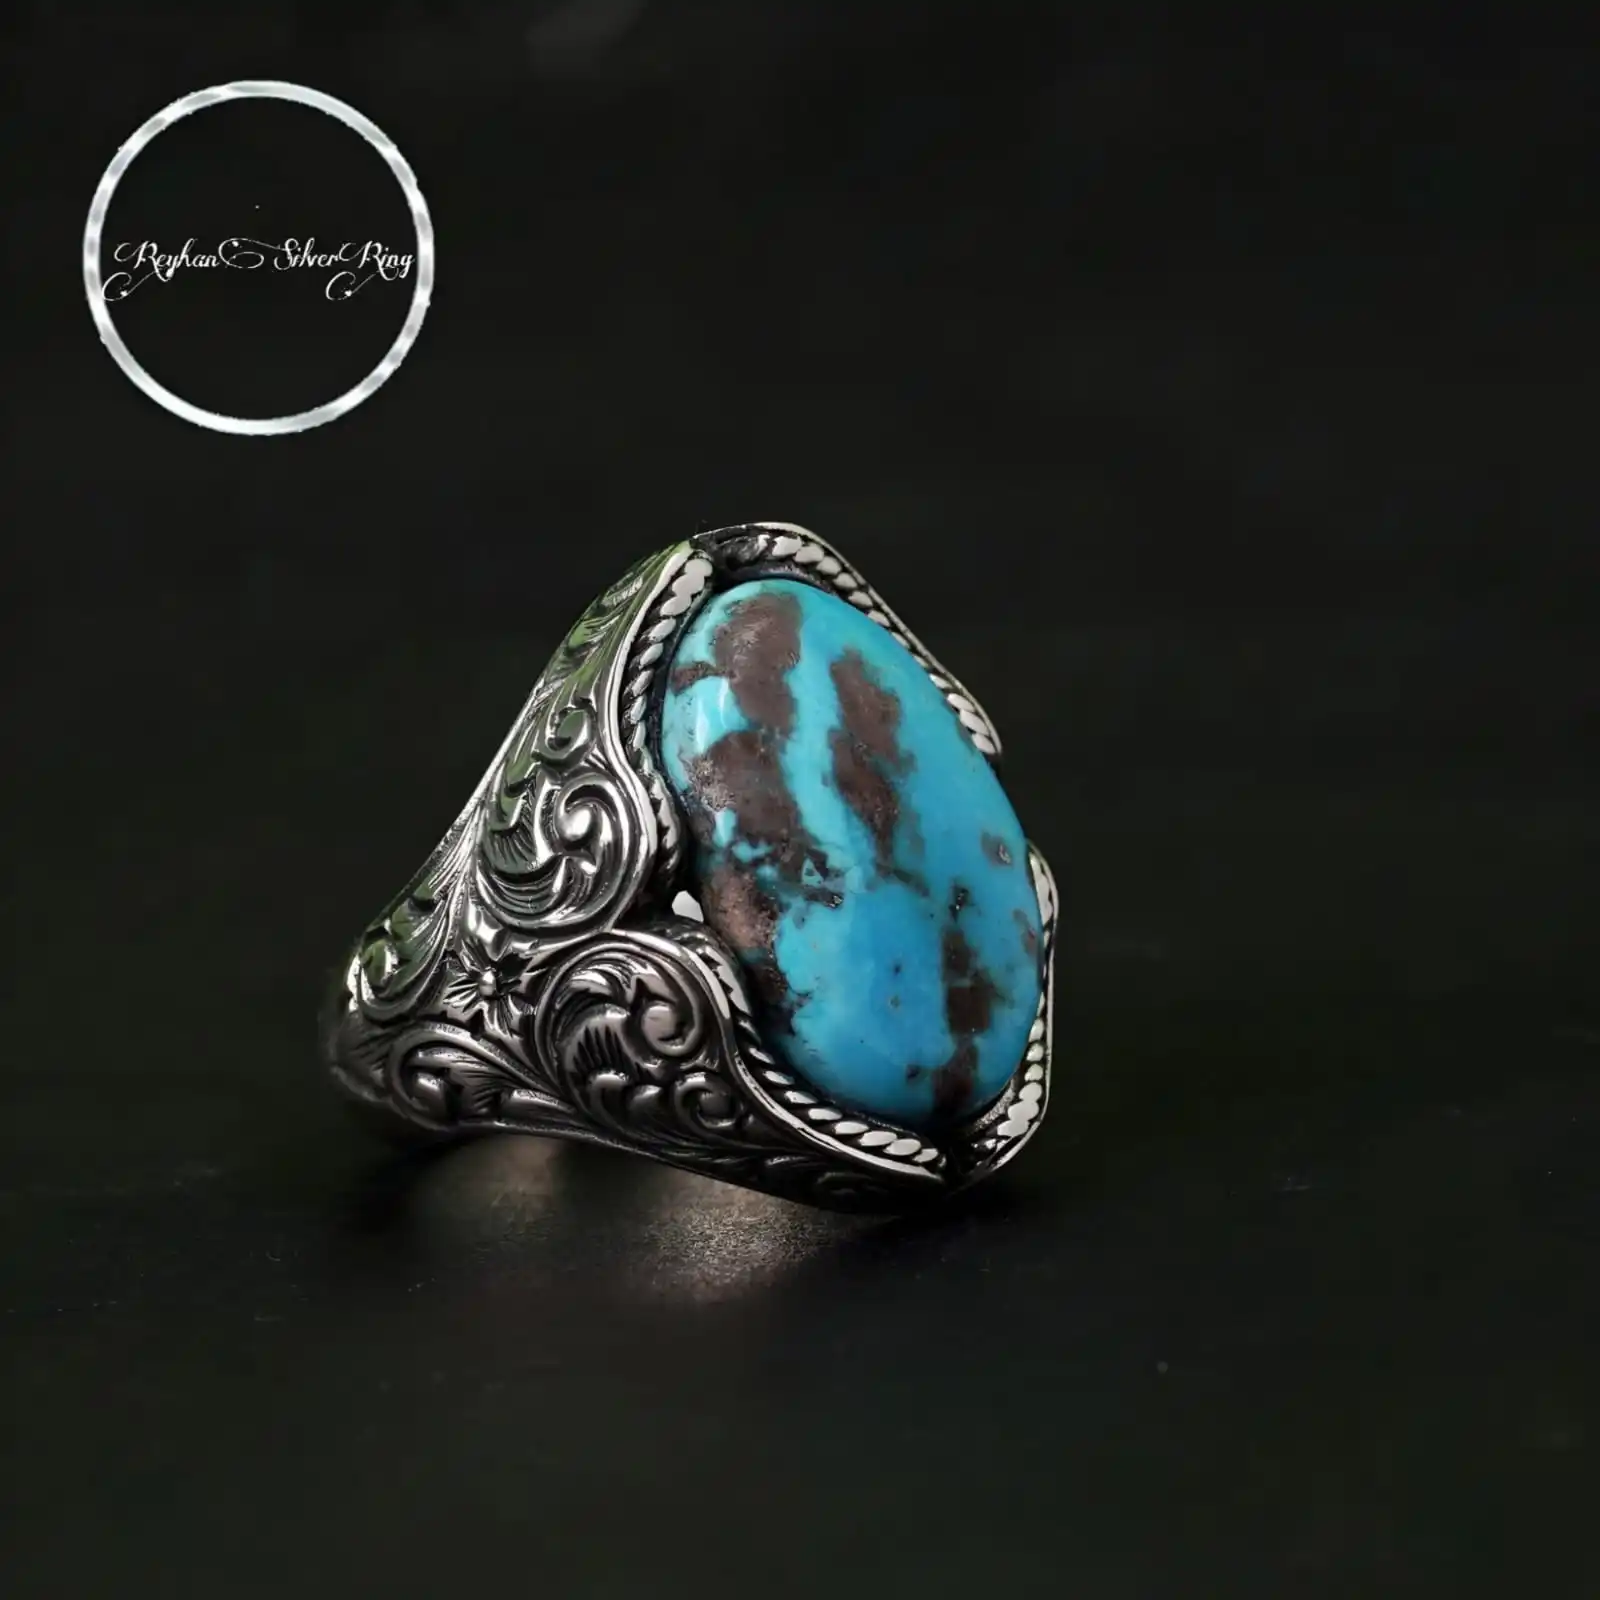 

Handcrafted Engraved Silver Ring With Turquoise Stone, Natural Stone Engraving Patterned Jewelry, Unique Handmade Design